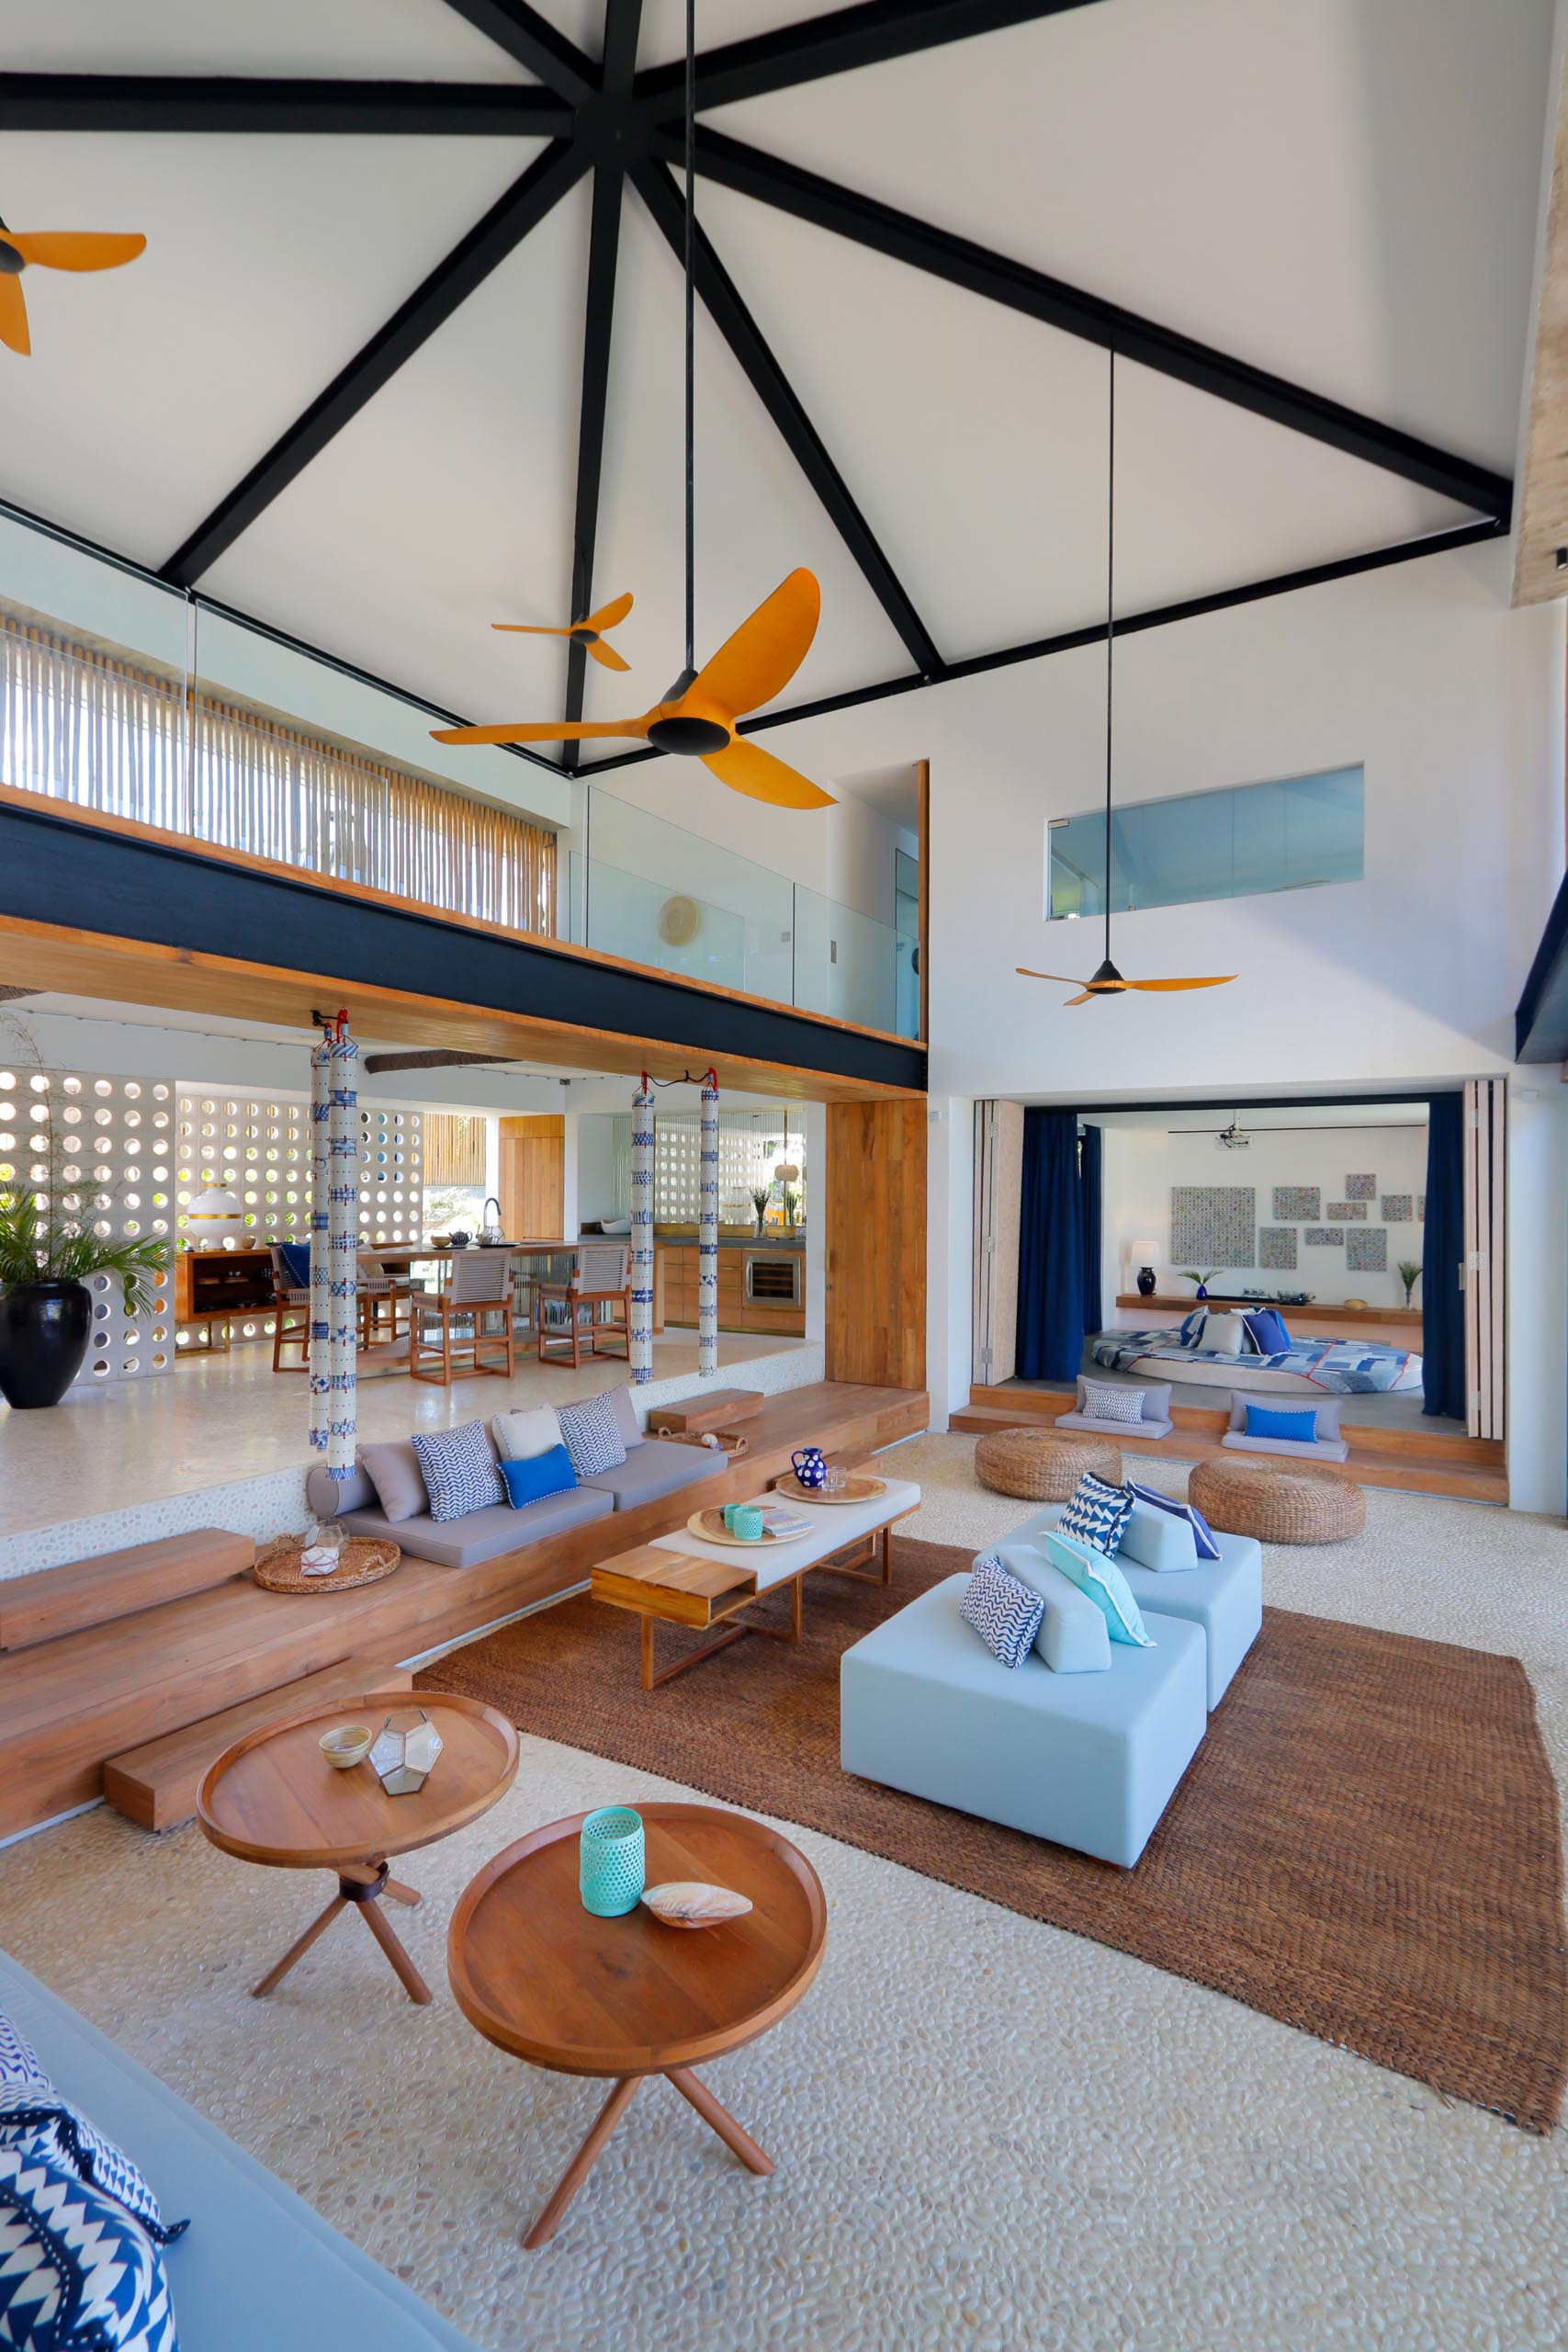 A modern beach house interior with an open living room and double height ceiling.